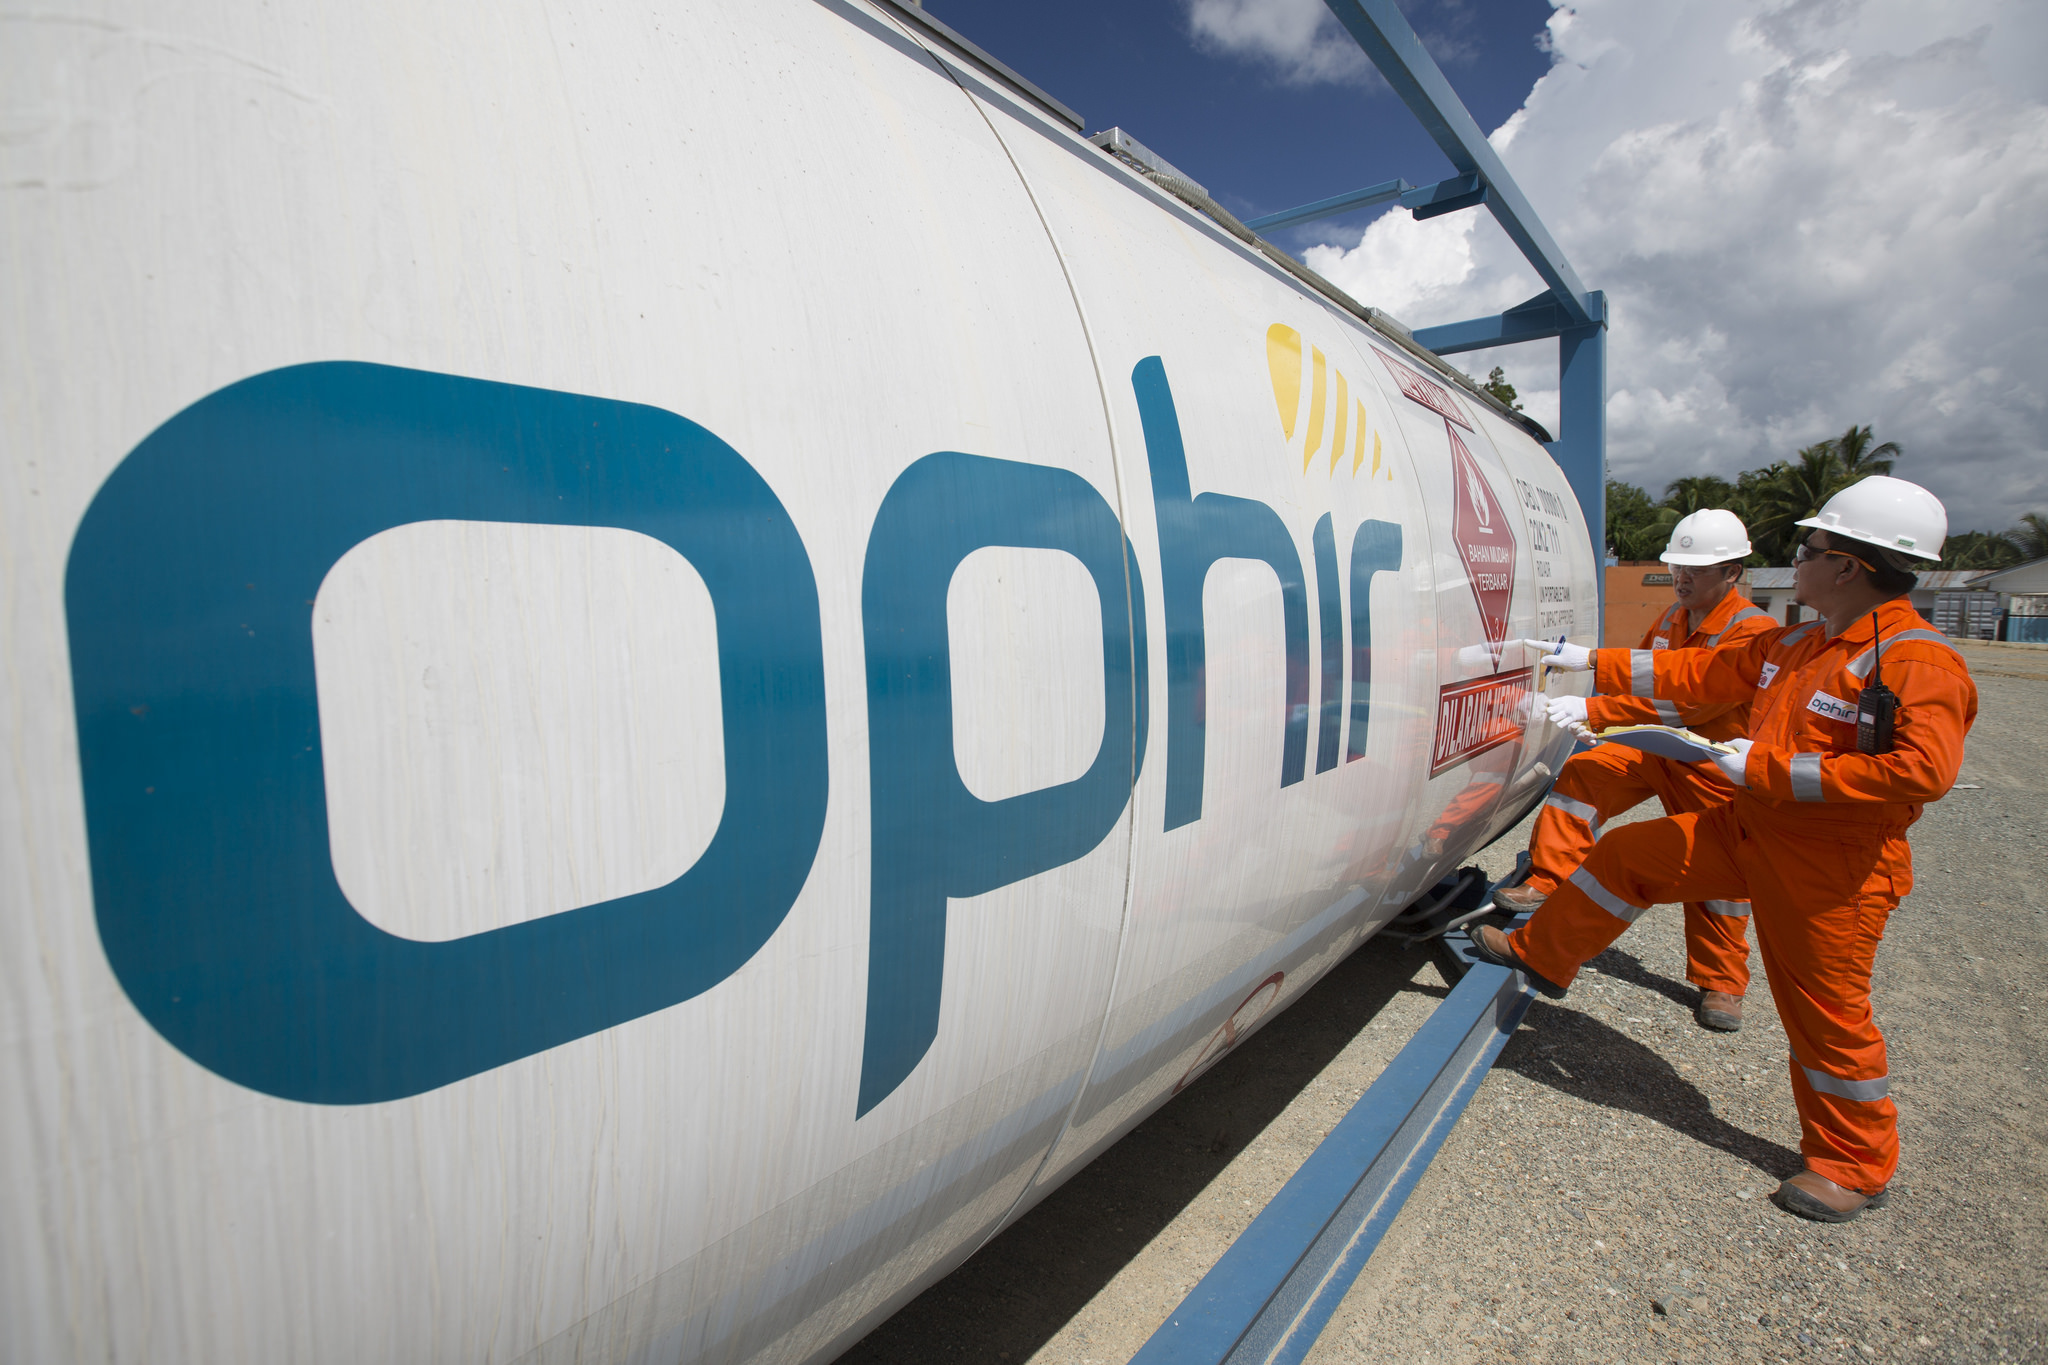 Medco increases Ophir takeover bid to $537 million